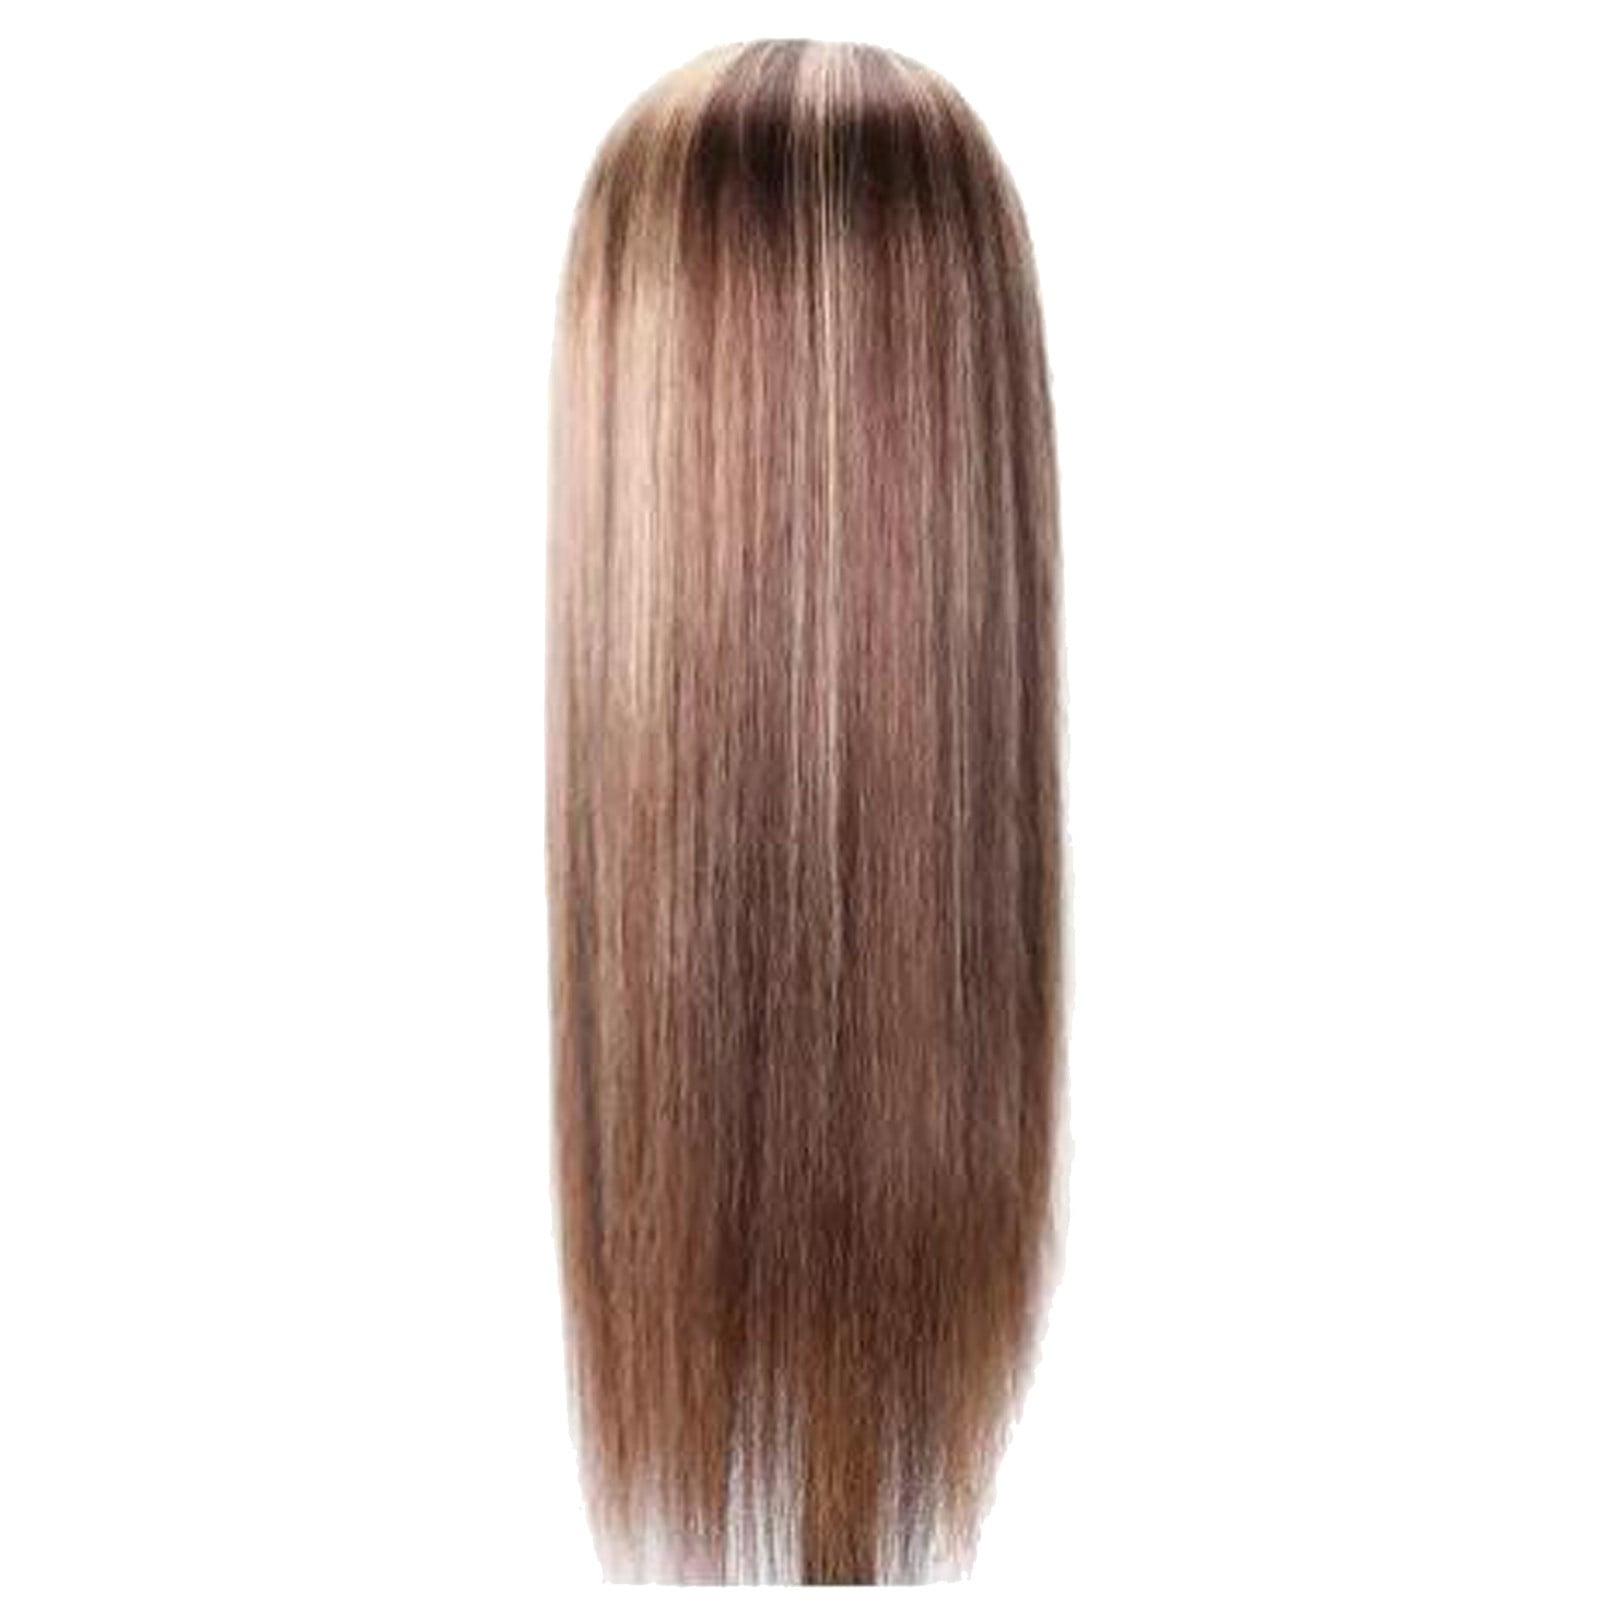 Durable Heat Resistant Synthetic Wigs Women's Wigs Daily Wigs Long Straight Wigs Milk Tea Brown Gradient Straight Hair Cosplay Wigs